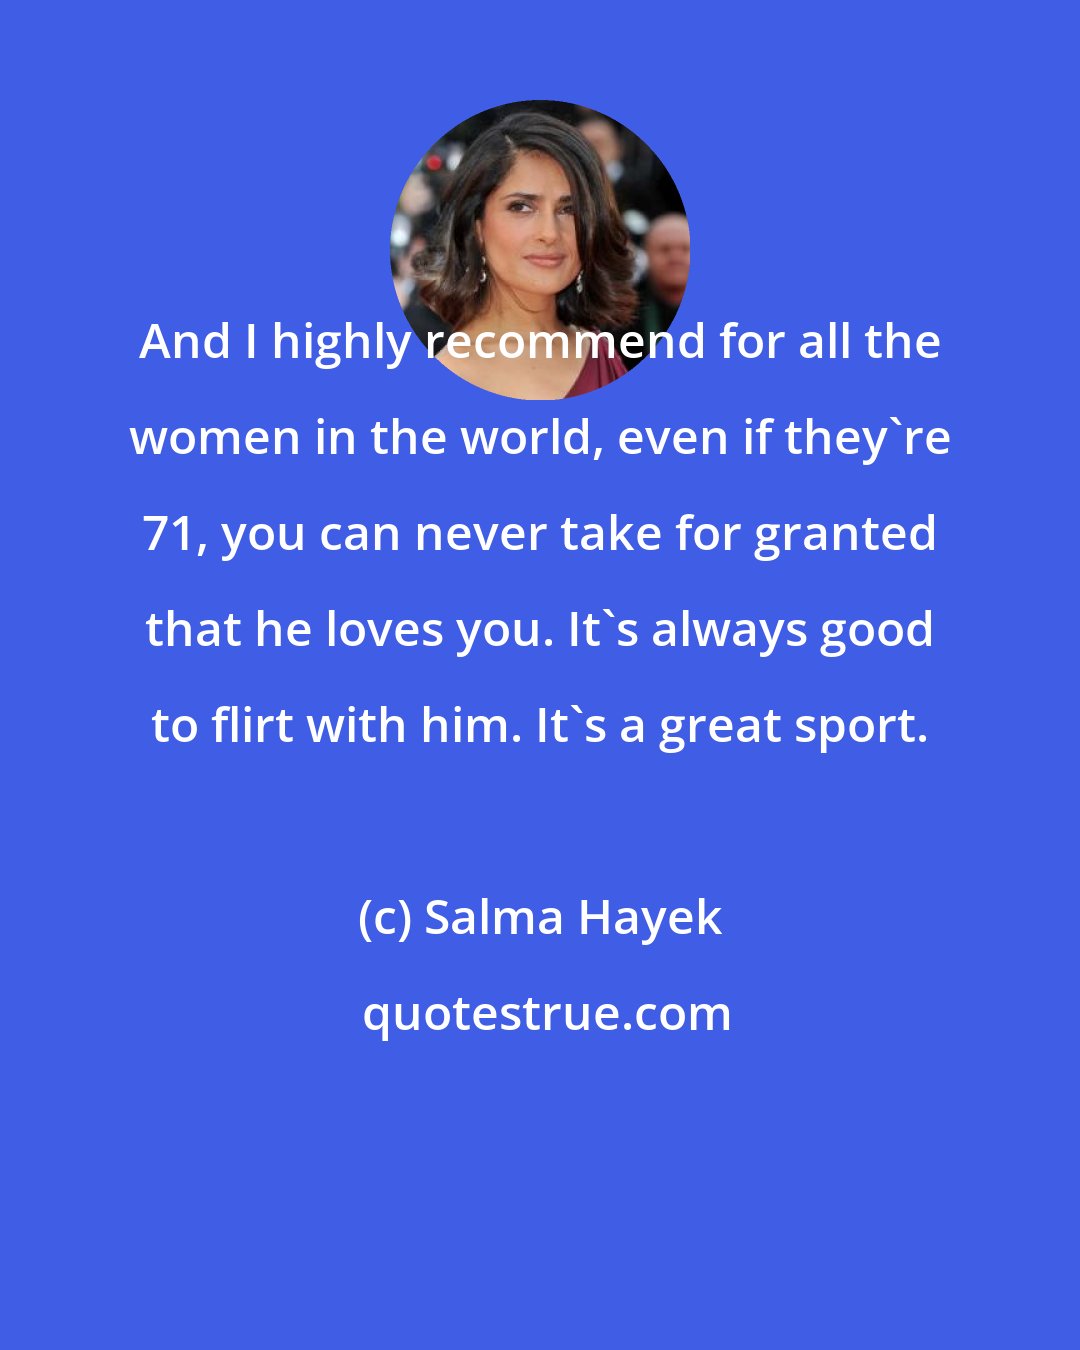 Salma Hayek: And I highly recommend for all the women in the world, even if they're 71, you can never take for granted that he loves you. It's always good to flirt with him. It's a great sport.